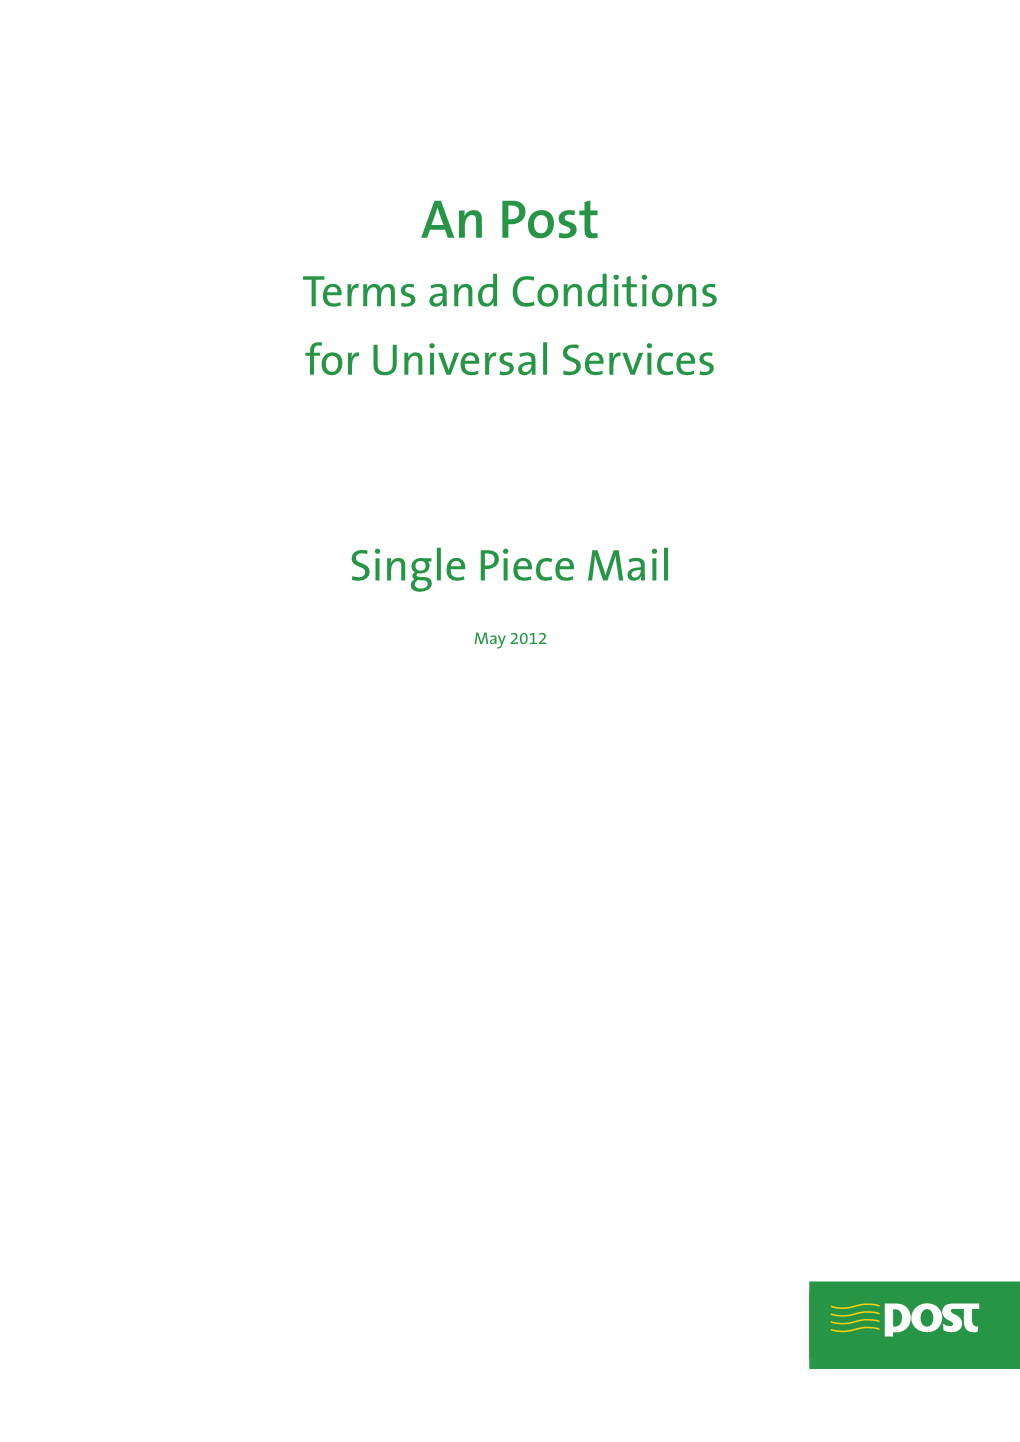 Terms and Conditions for Universal Services